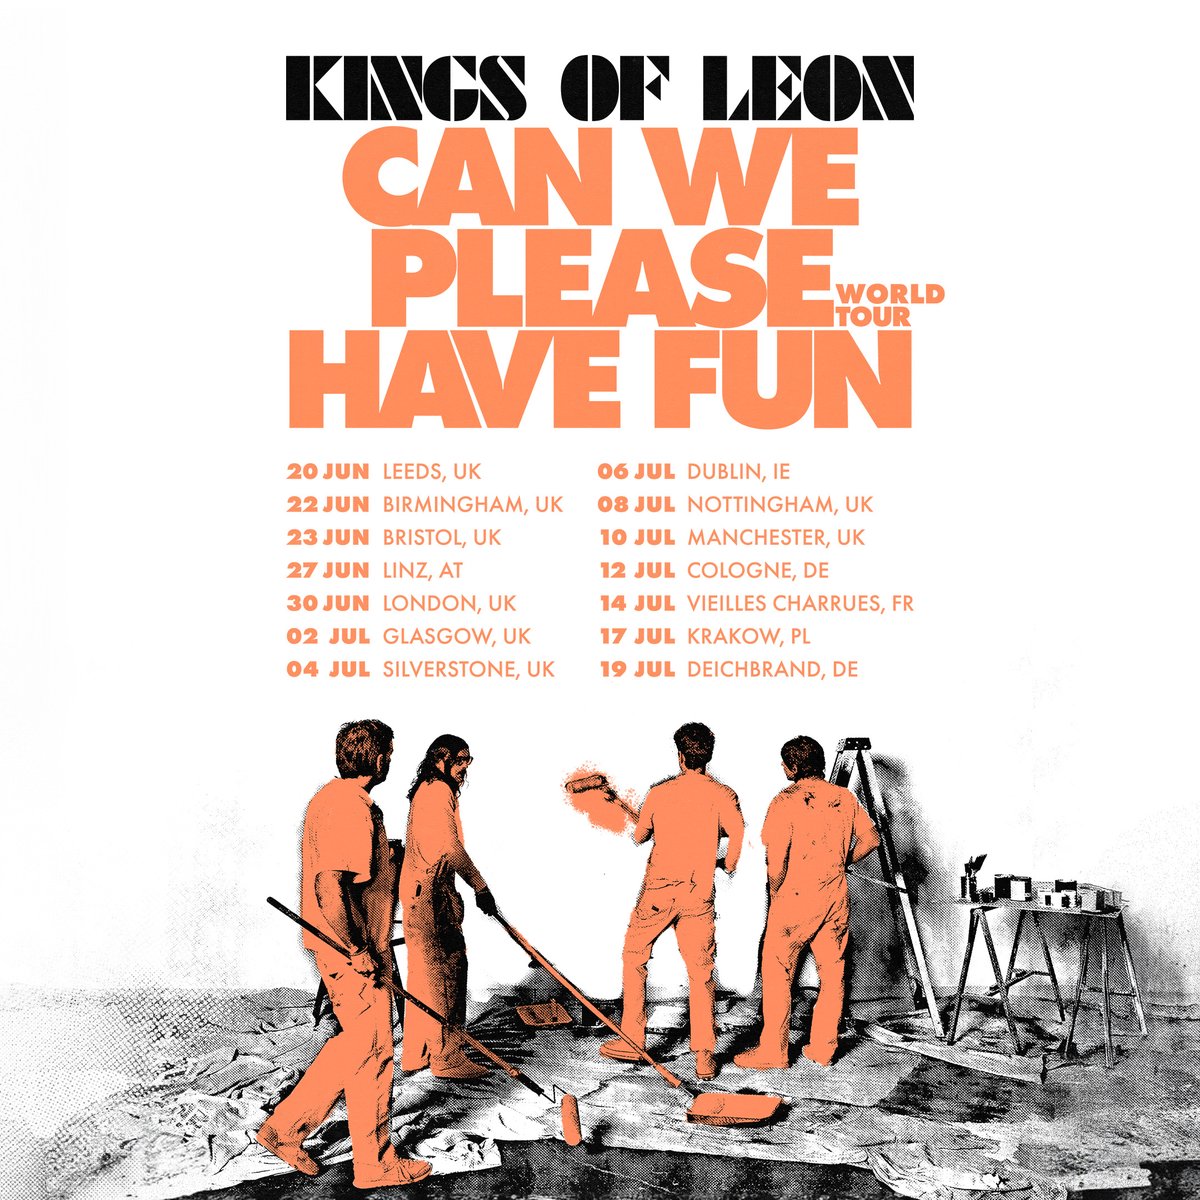 Can We Please Have Fun UK & EU Tour - Pre-order the album from the official store for access to the artist presale on Weds, February 28, 9am local for select shows. Fans who have already pre-ordered will also get access. KingsOfLeon.lnk.to/TourAnnounce On Sale: Fri March 1, 9am local